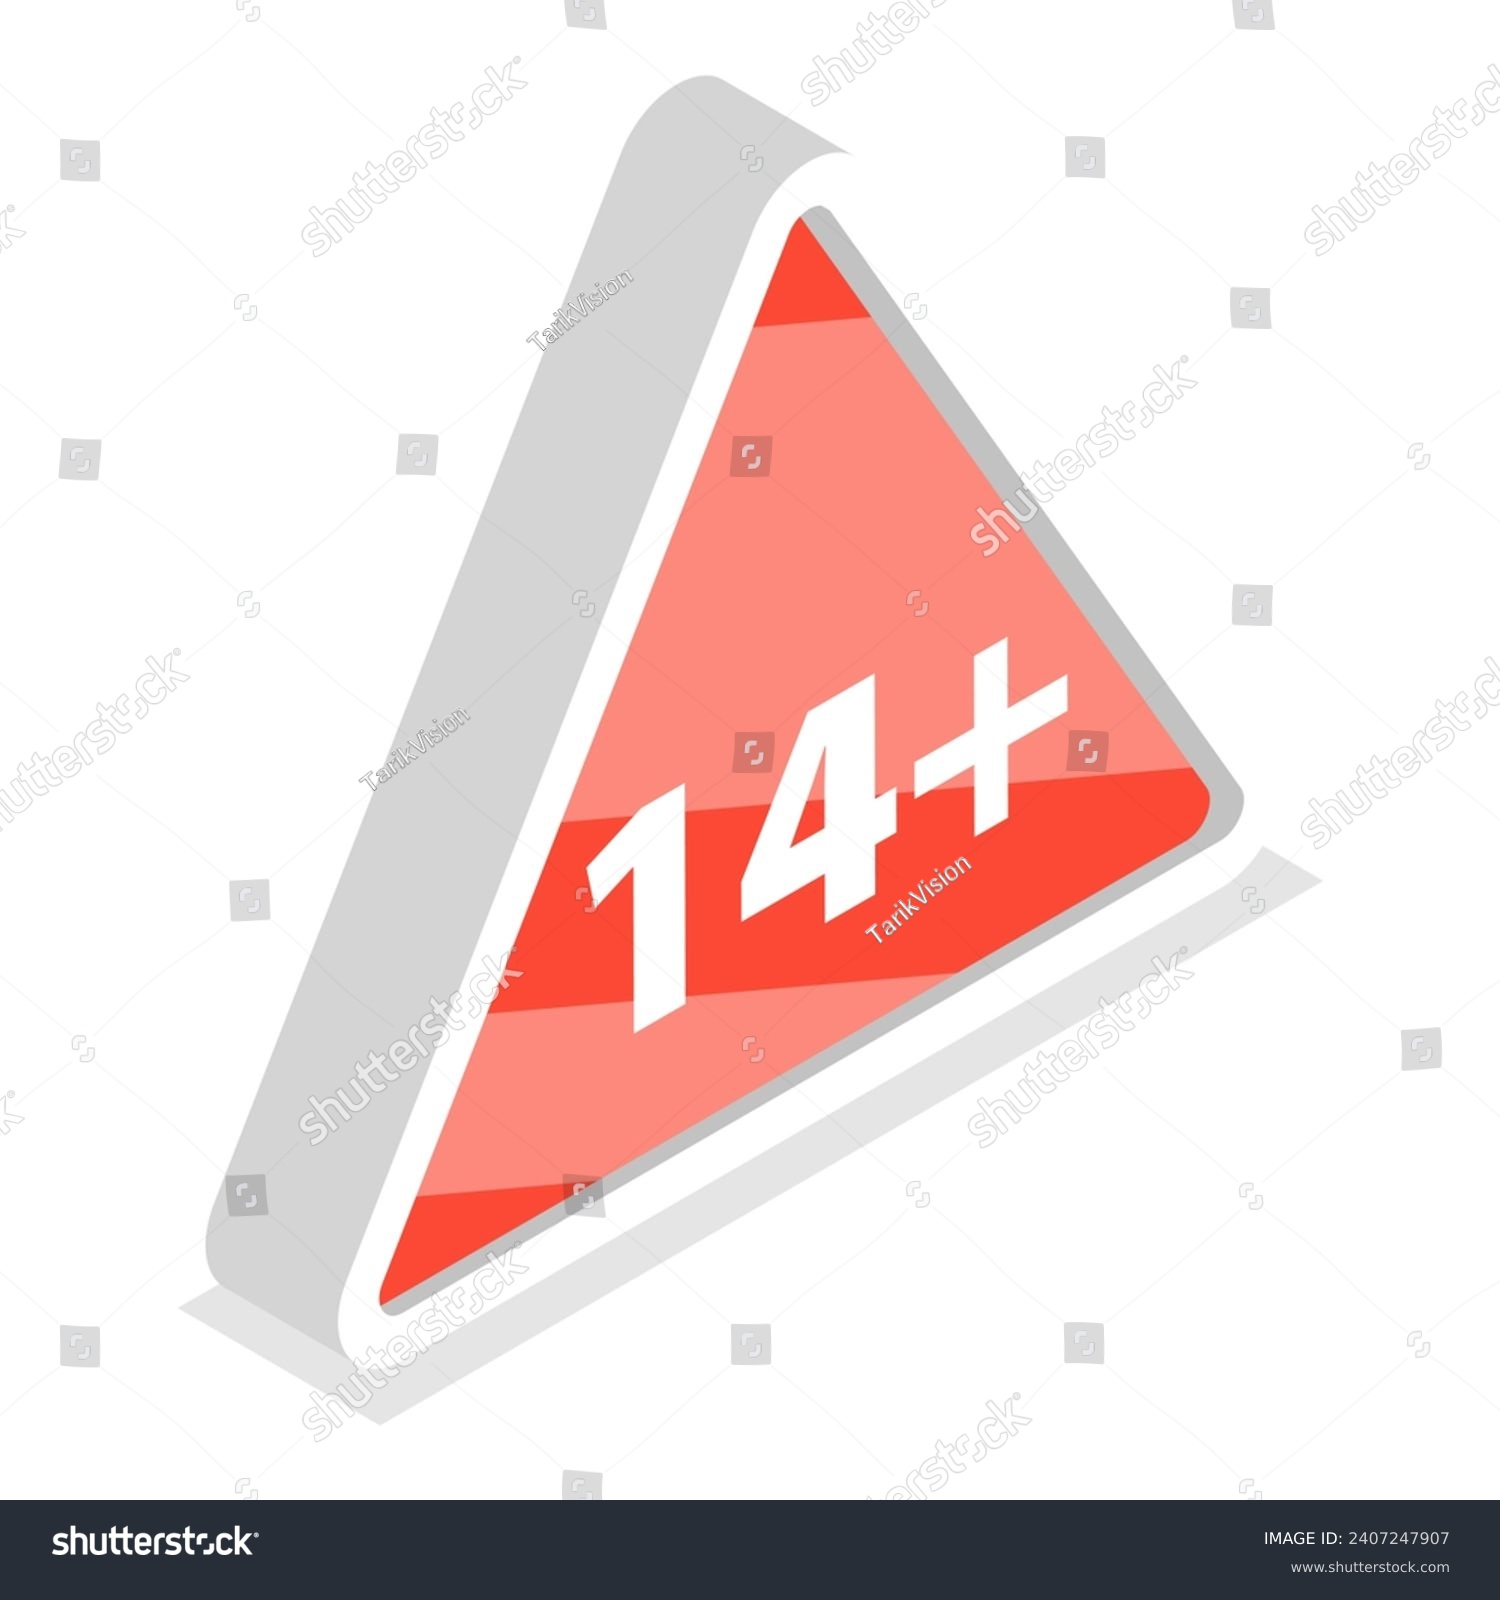 SVG of 3D Isometric Flat Vector Set of Sensitive Content Signs, Under Age Content. Item 4 svg